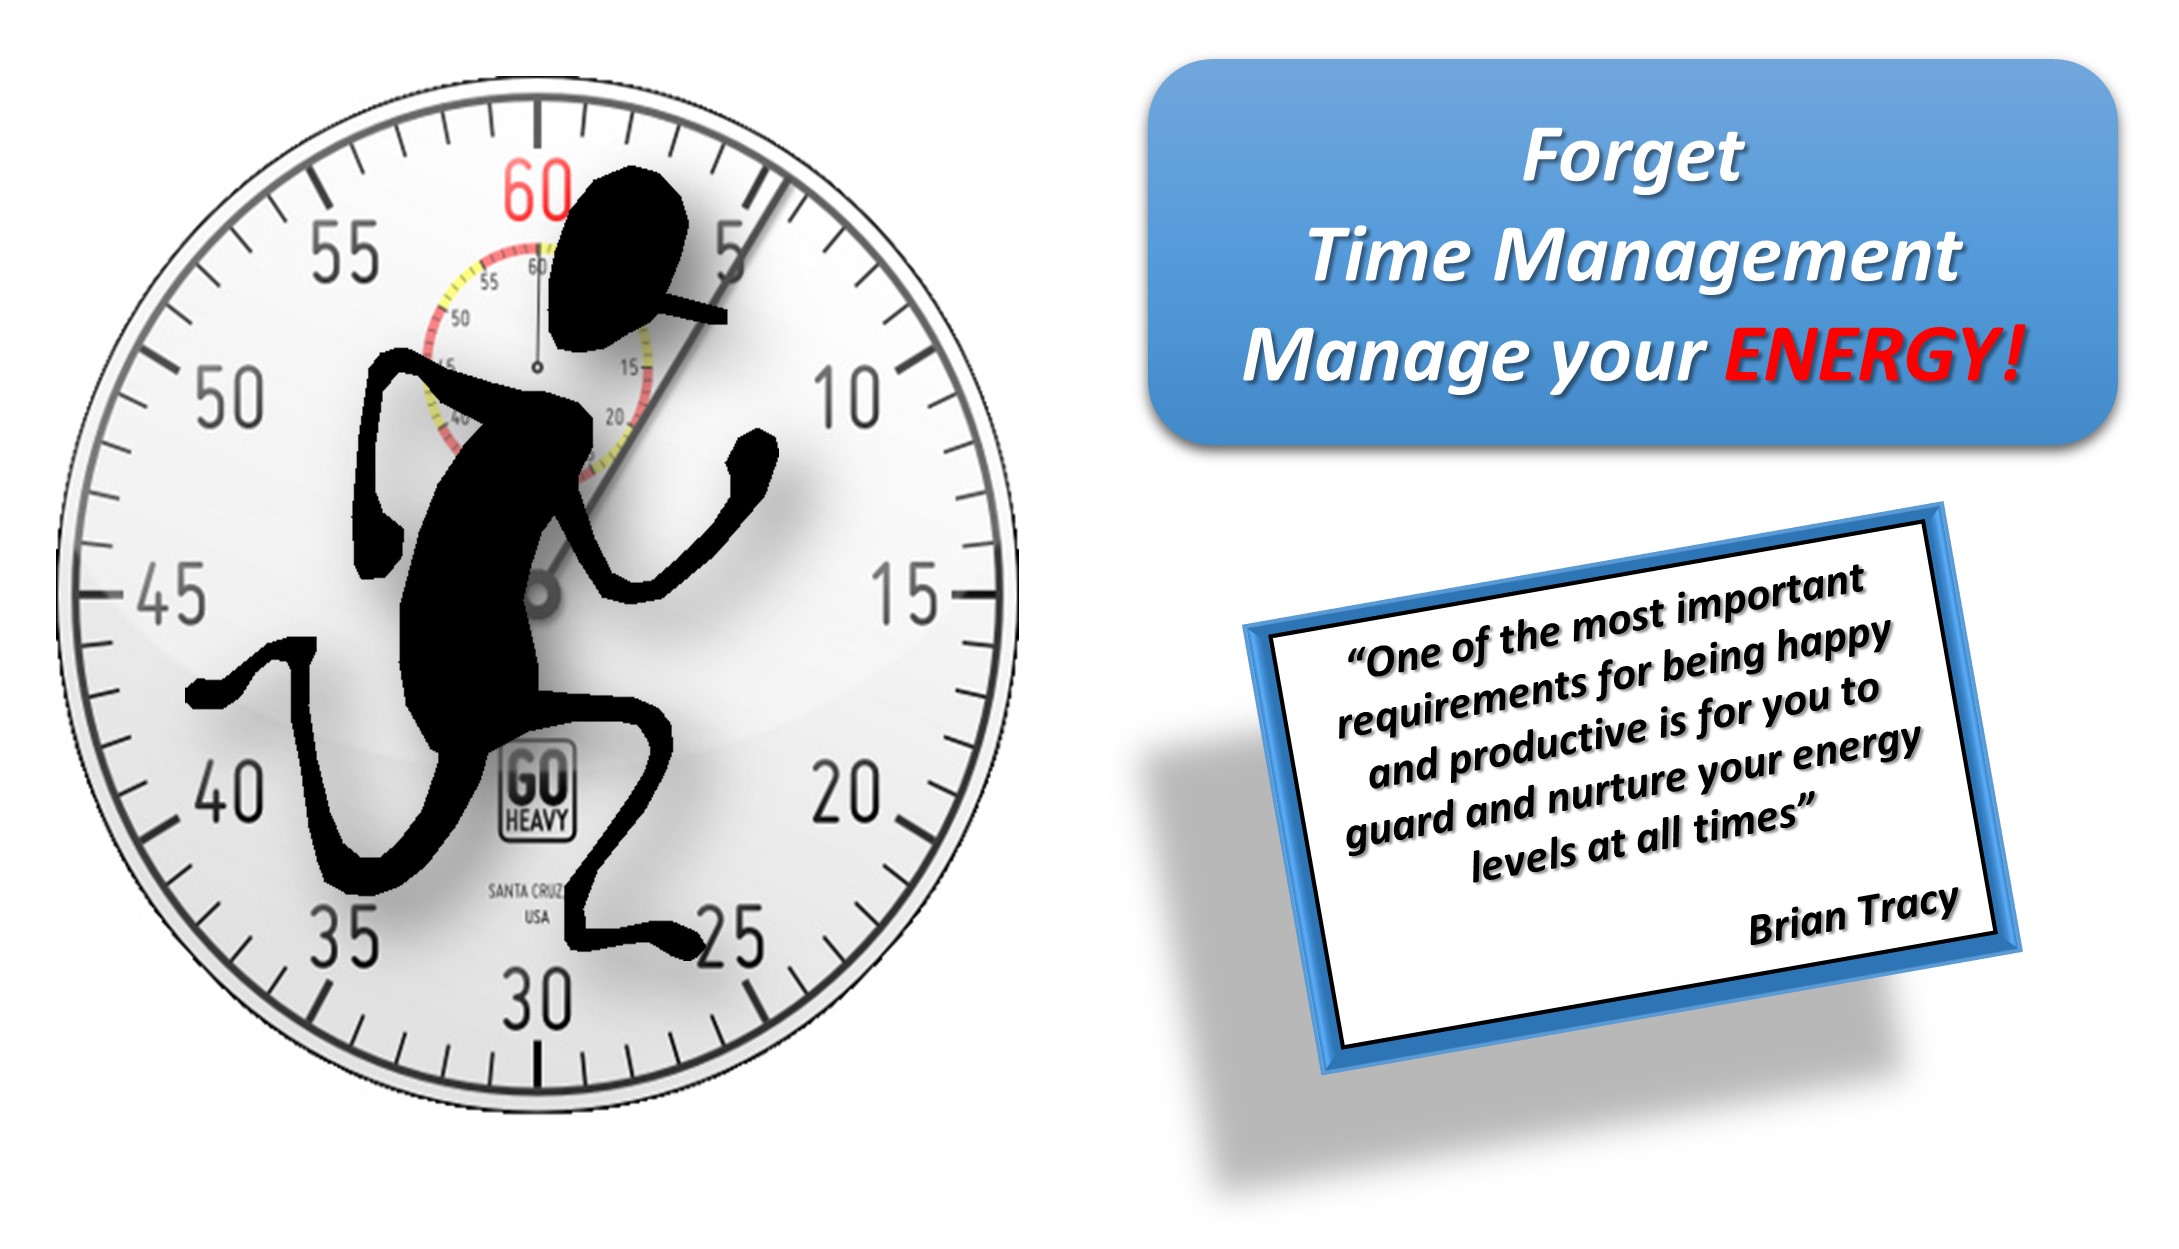 Forget Time Management – What About Your ENERGY?